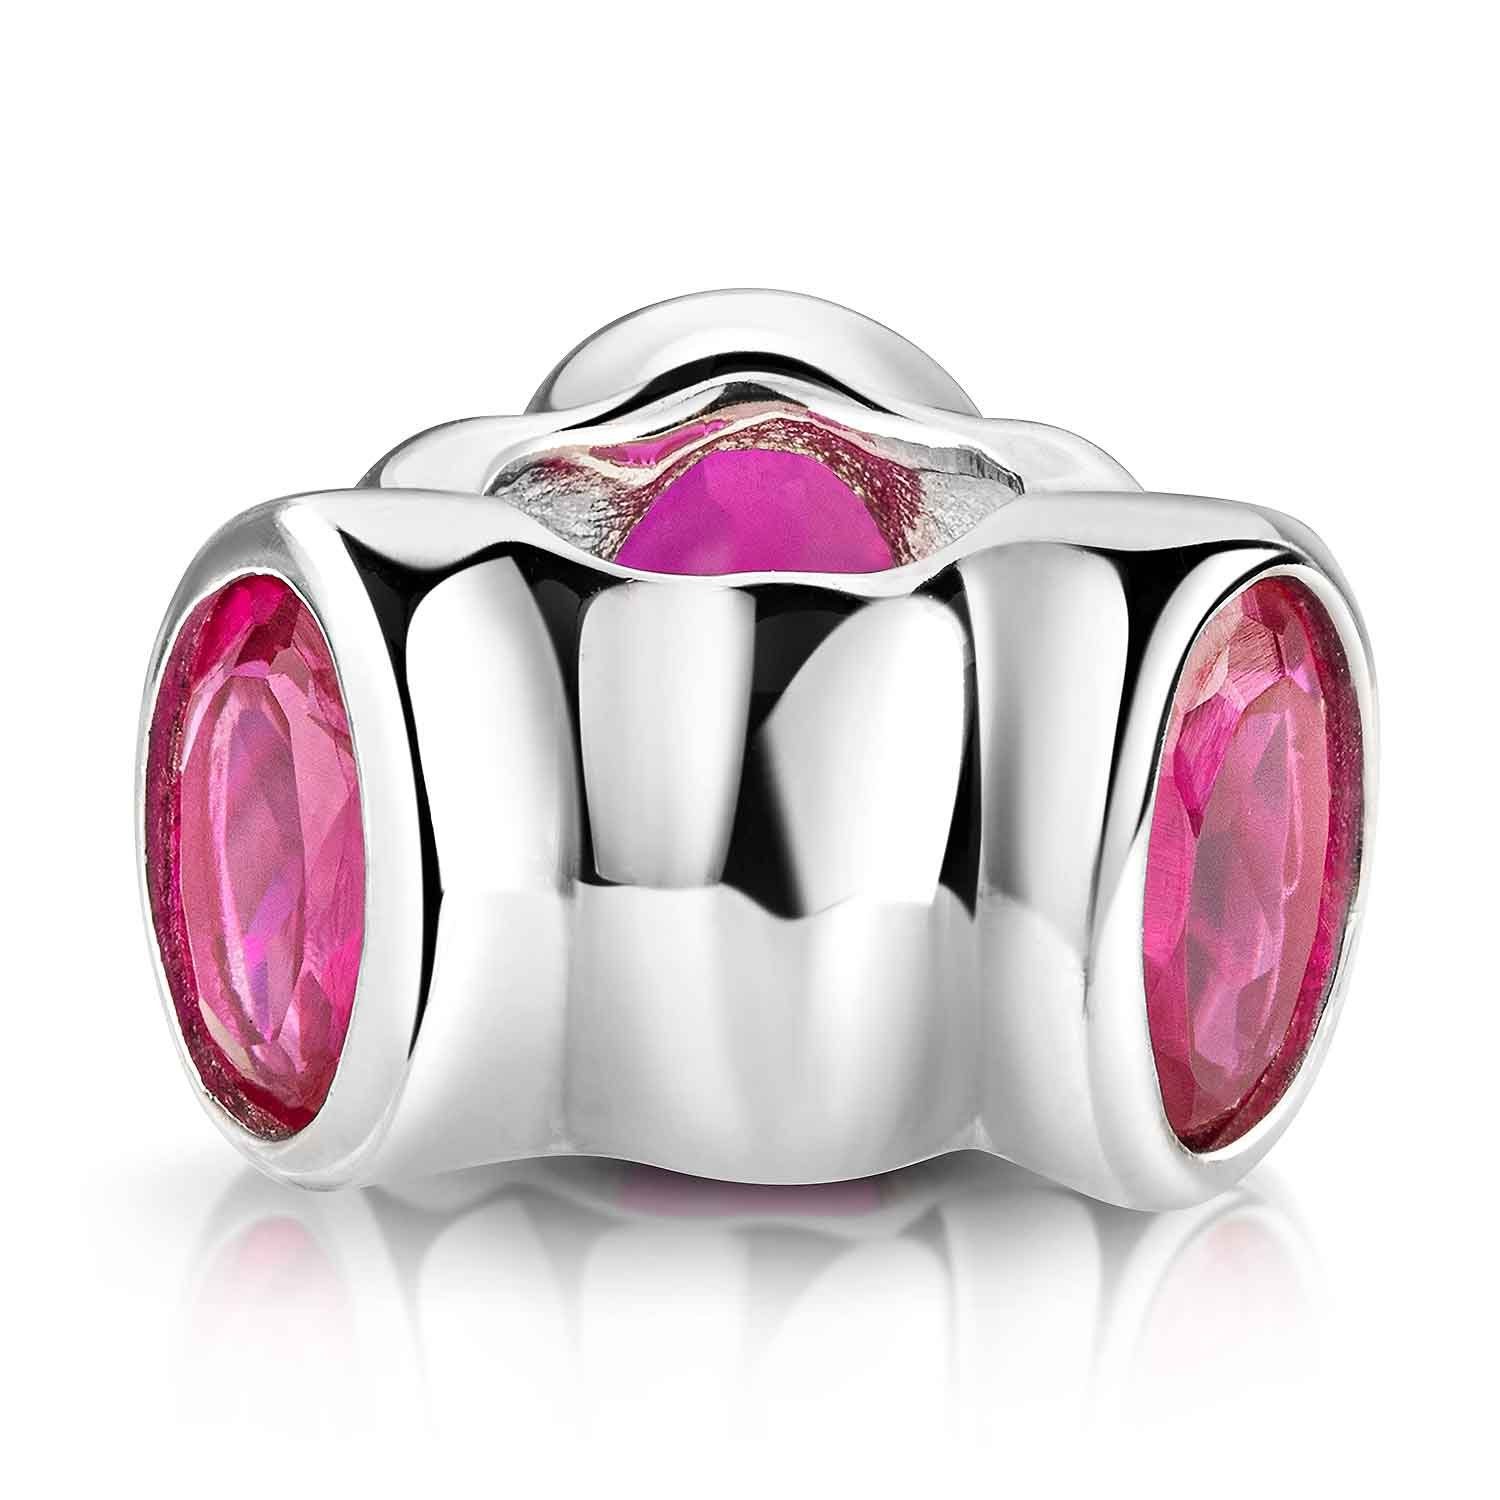 Materia Silber Zirkonia Magenta 925 Element 873, Charms Bead Pink Sterling